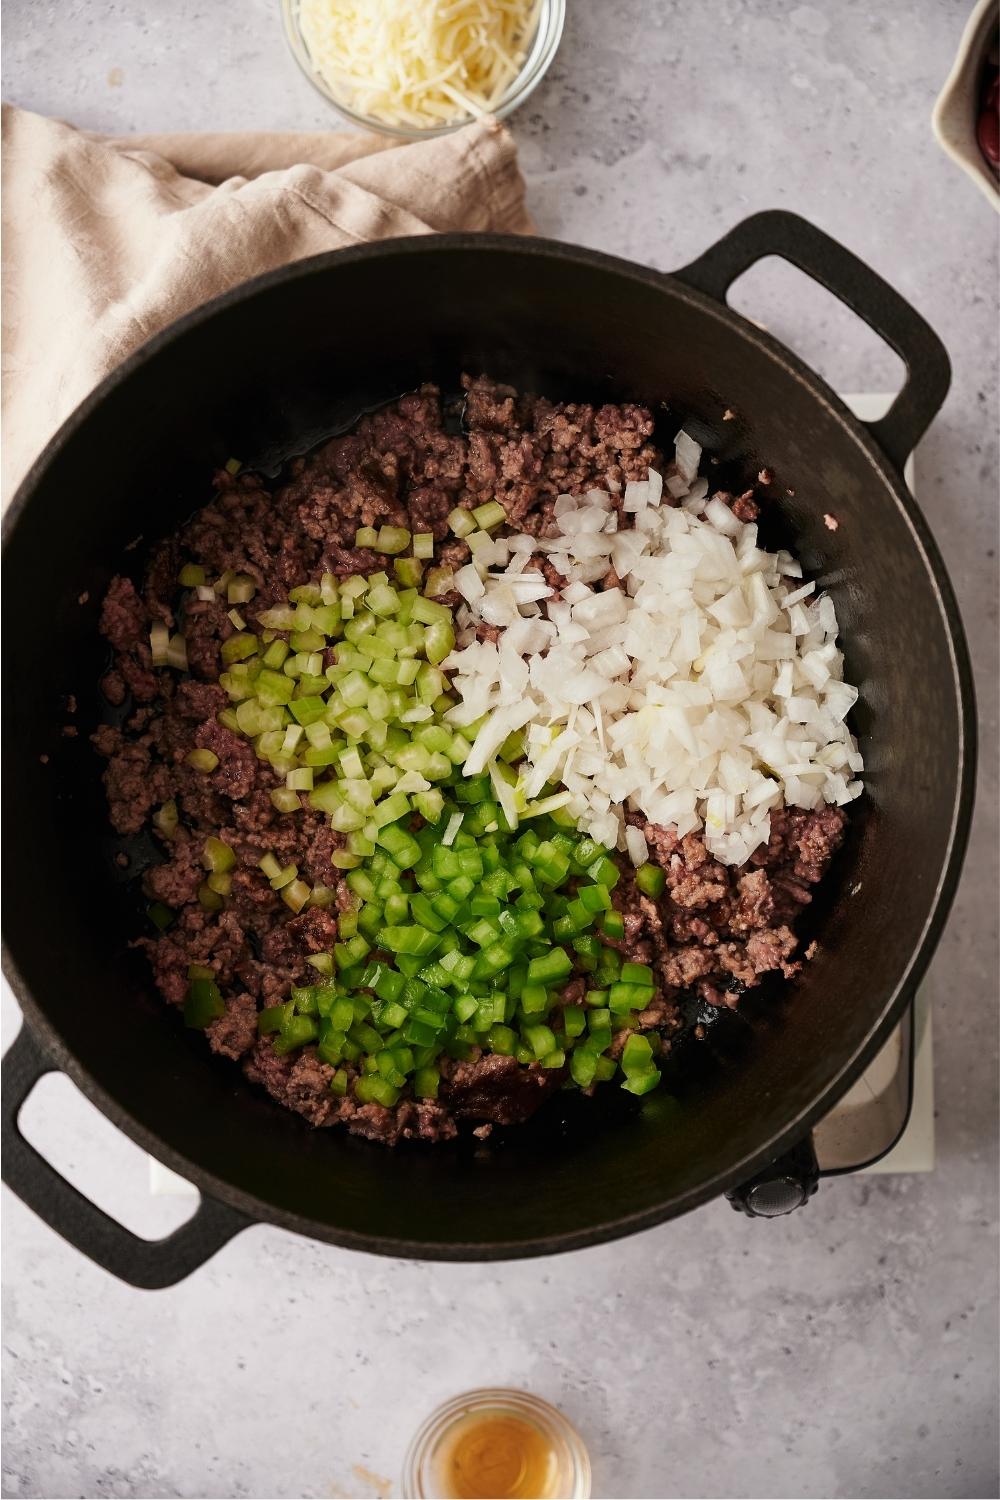 A large pot containing ground beef, green bell pepper, onion, and celery. The pot sits on a grey counter and is surrounded by a kitchen towel and bowls of cheese and vinegar.